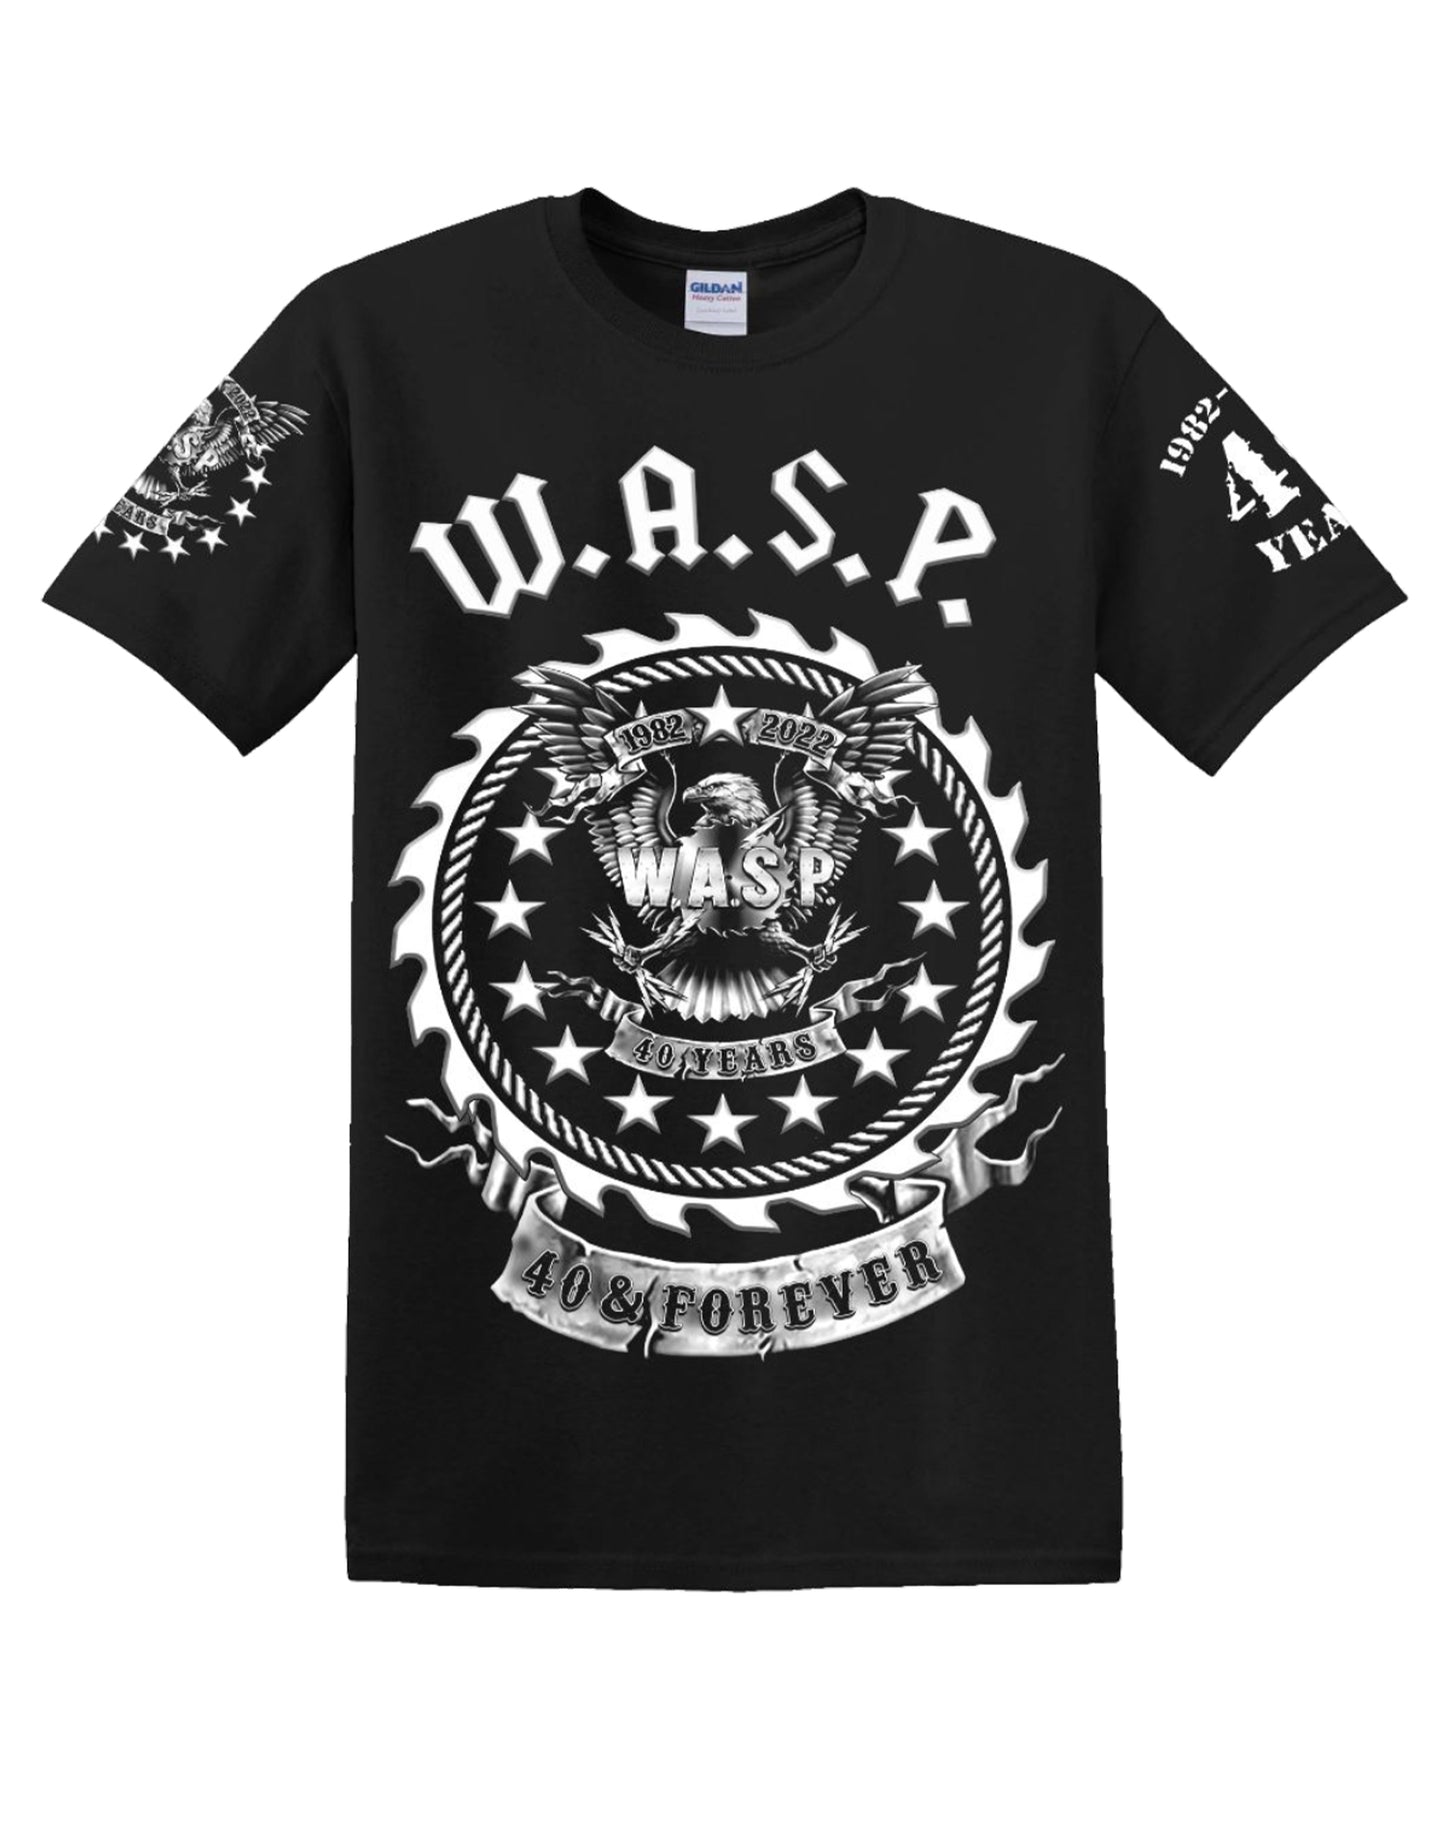 W.A.S.P. "40 & Forever" Mens Tee